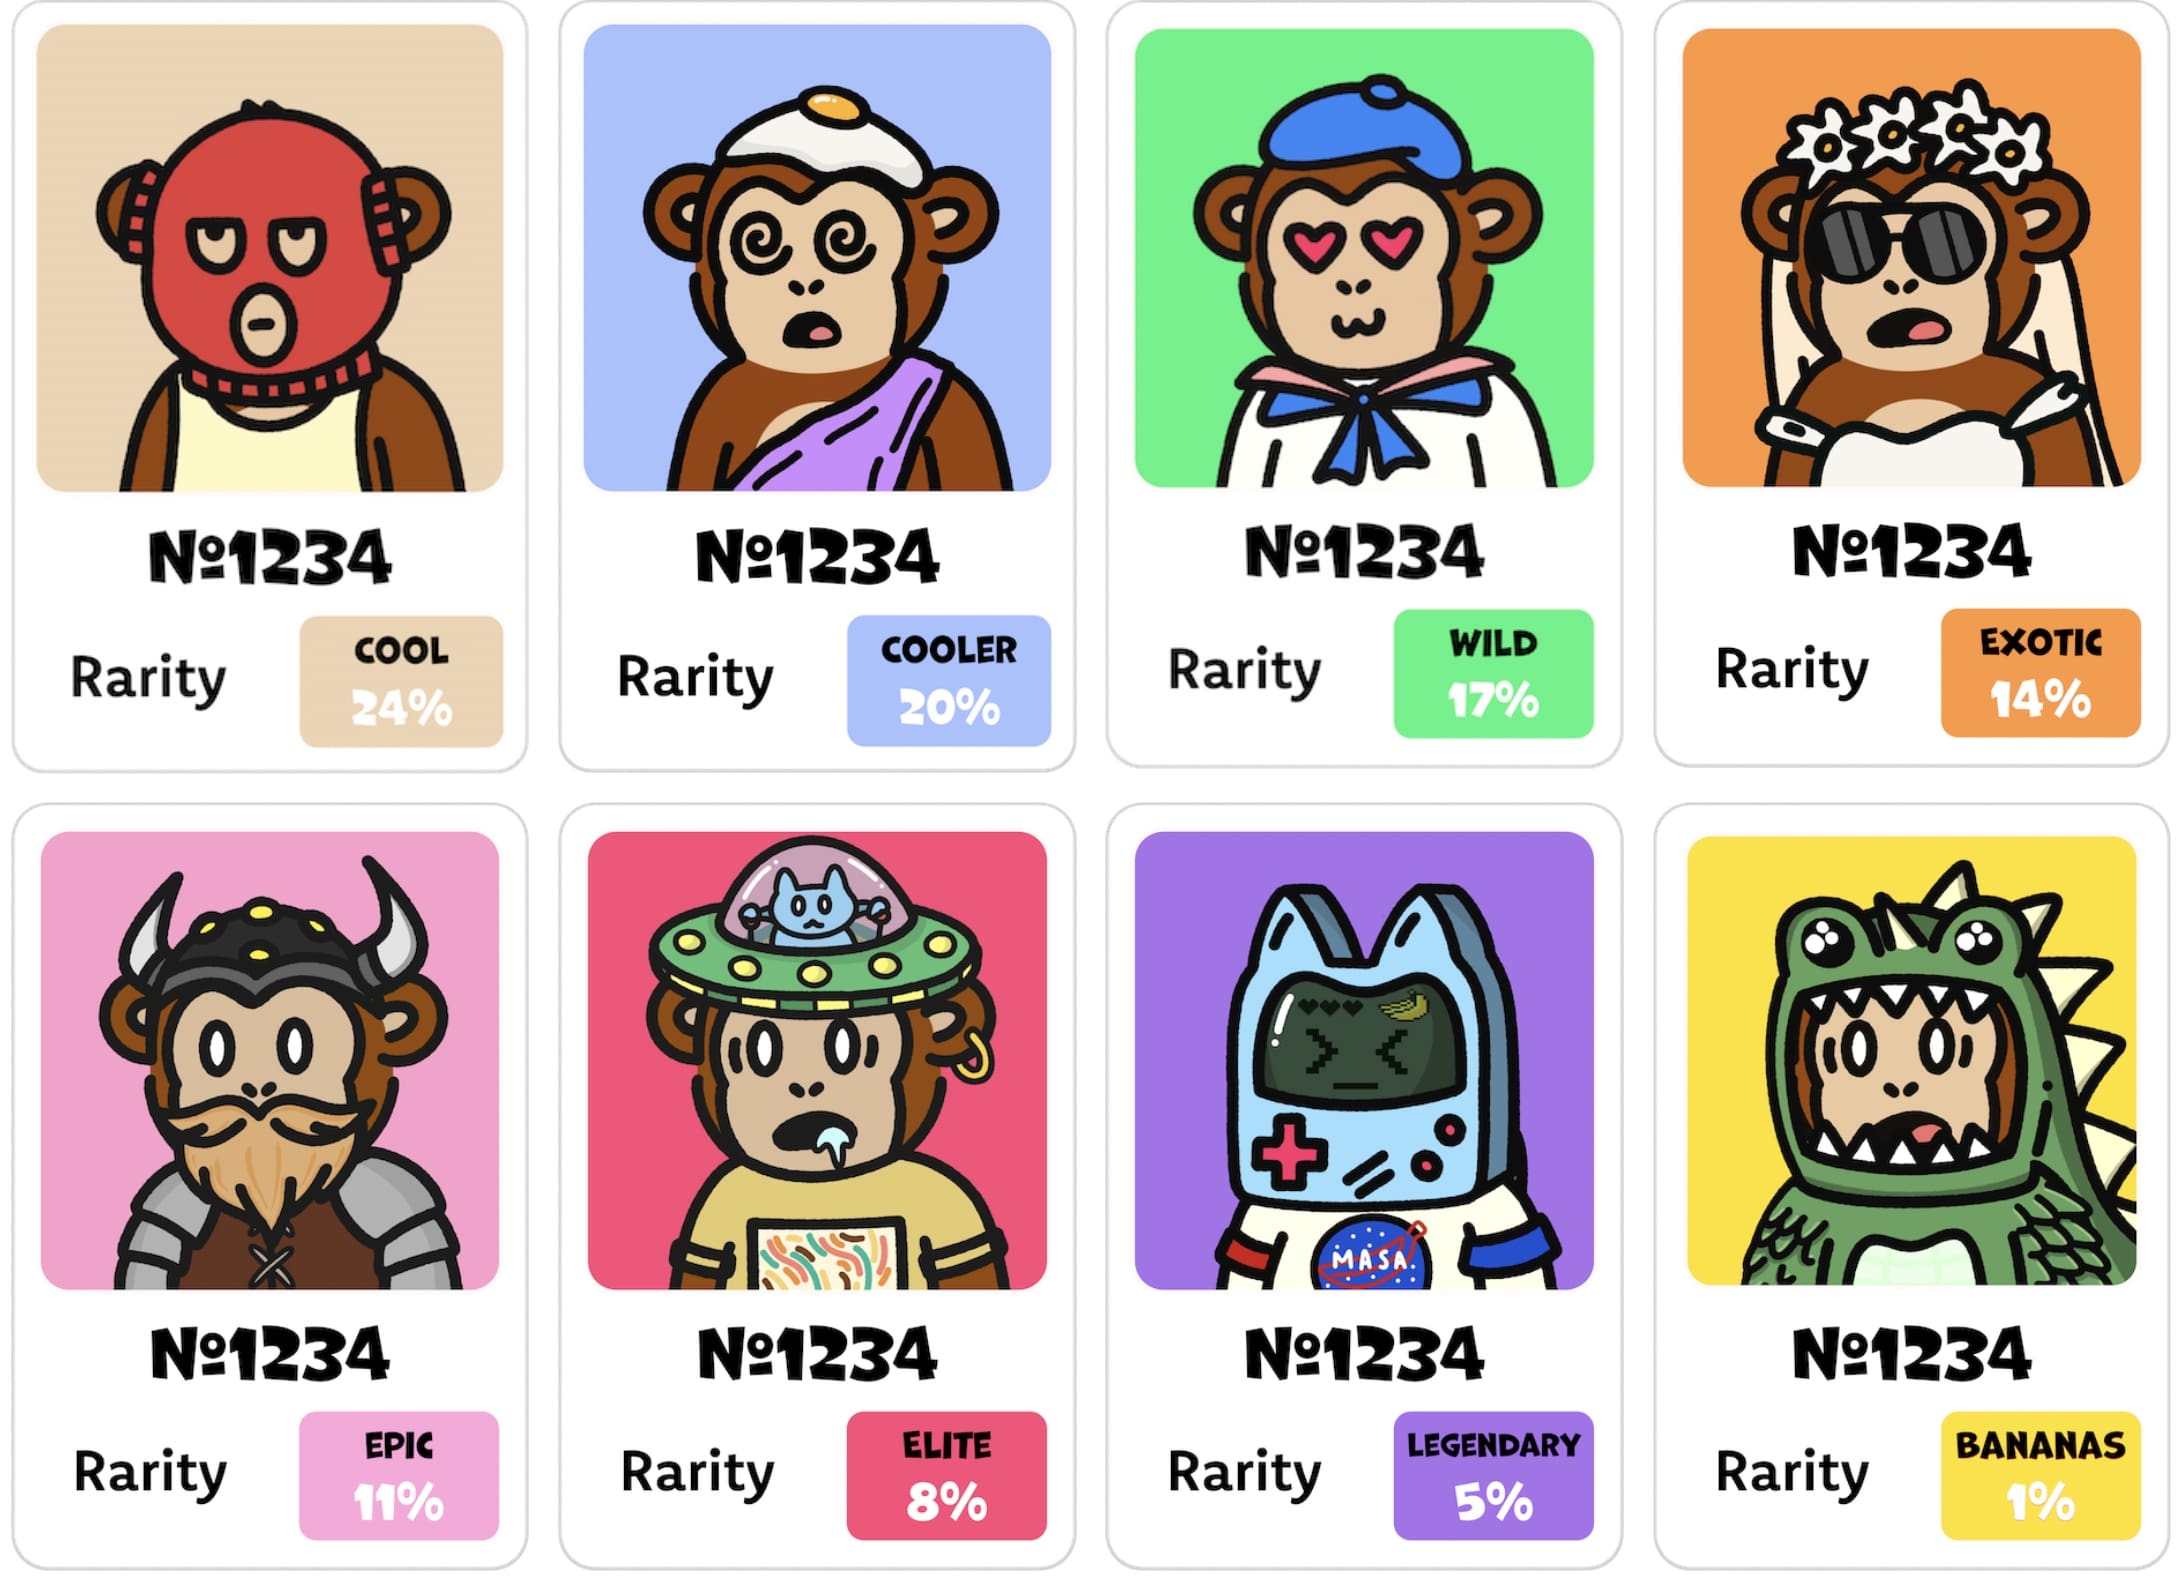 Different Cool Monke avatars and their rarity